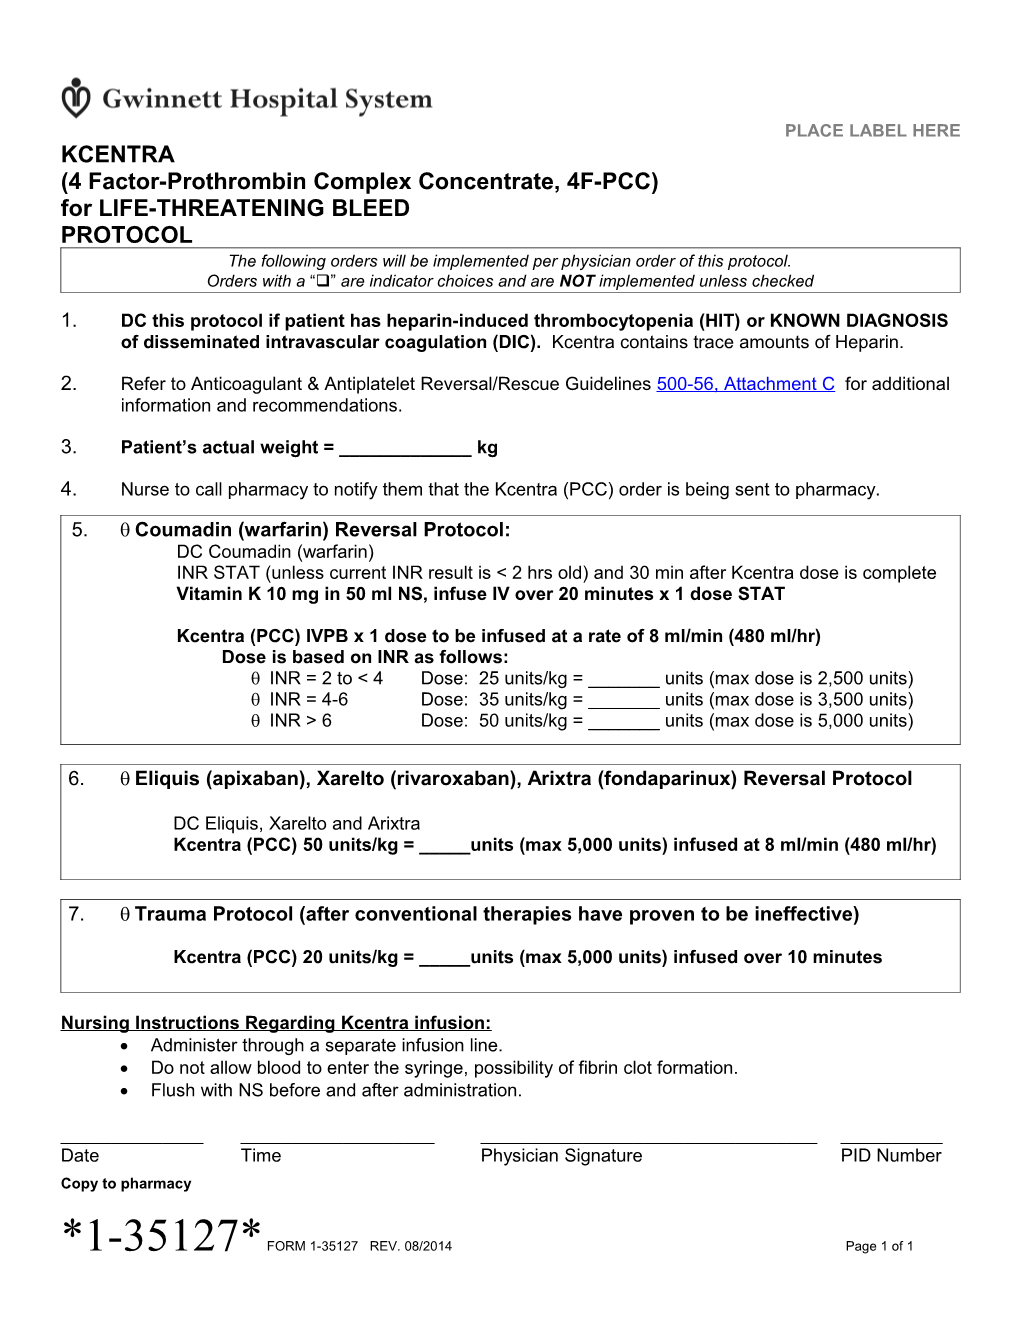 Kcentra 4F PCC For Life Threatening Bleed Protocol